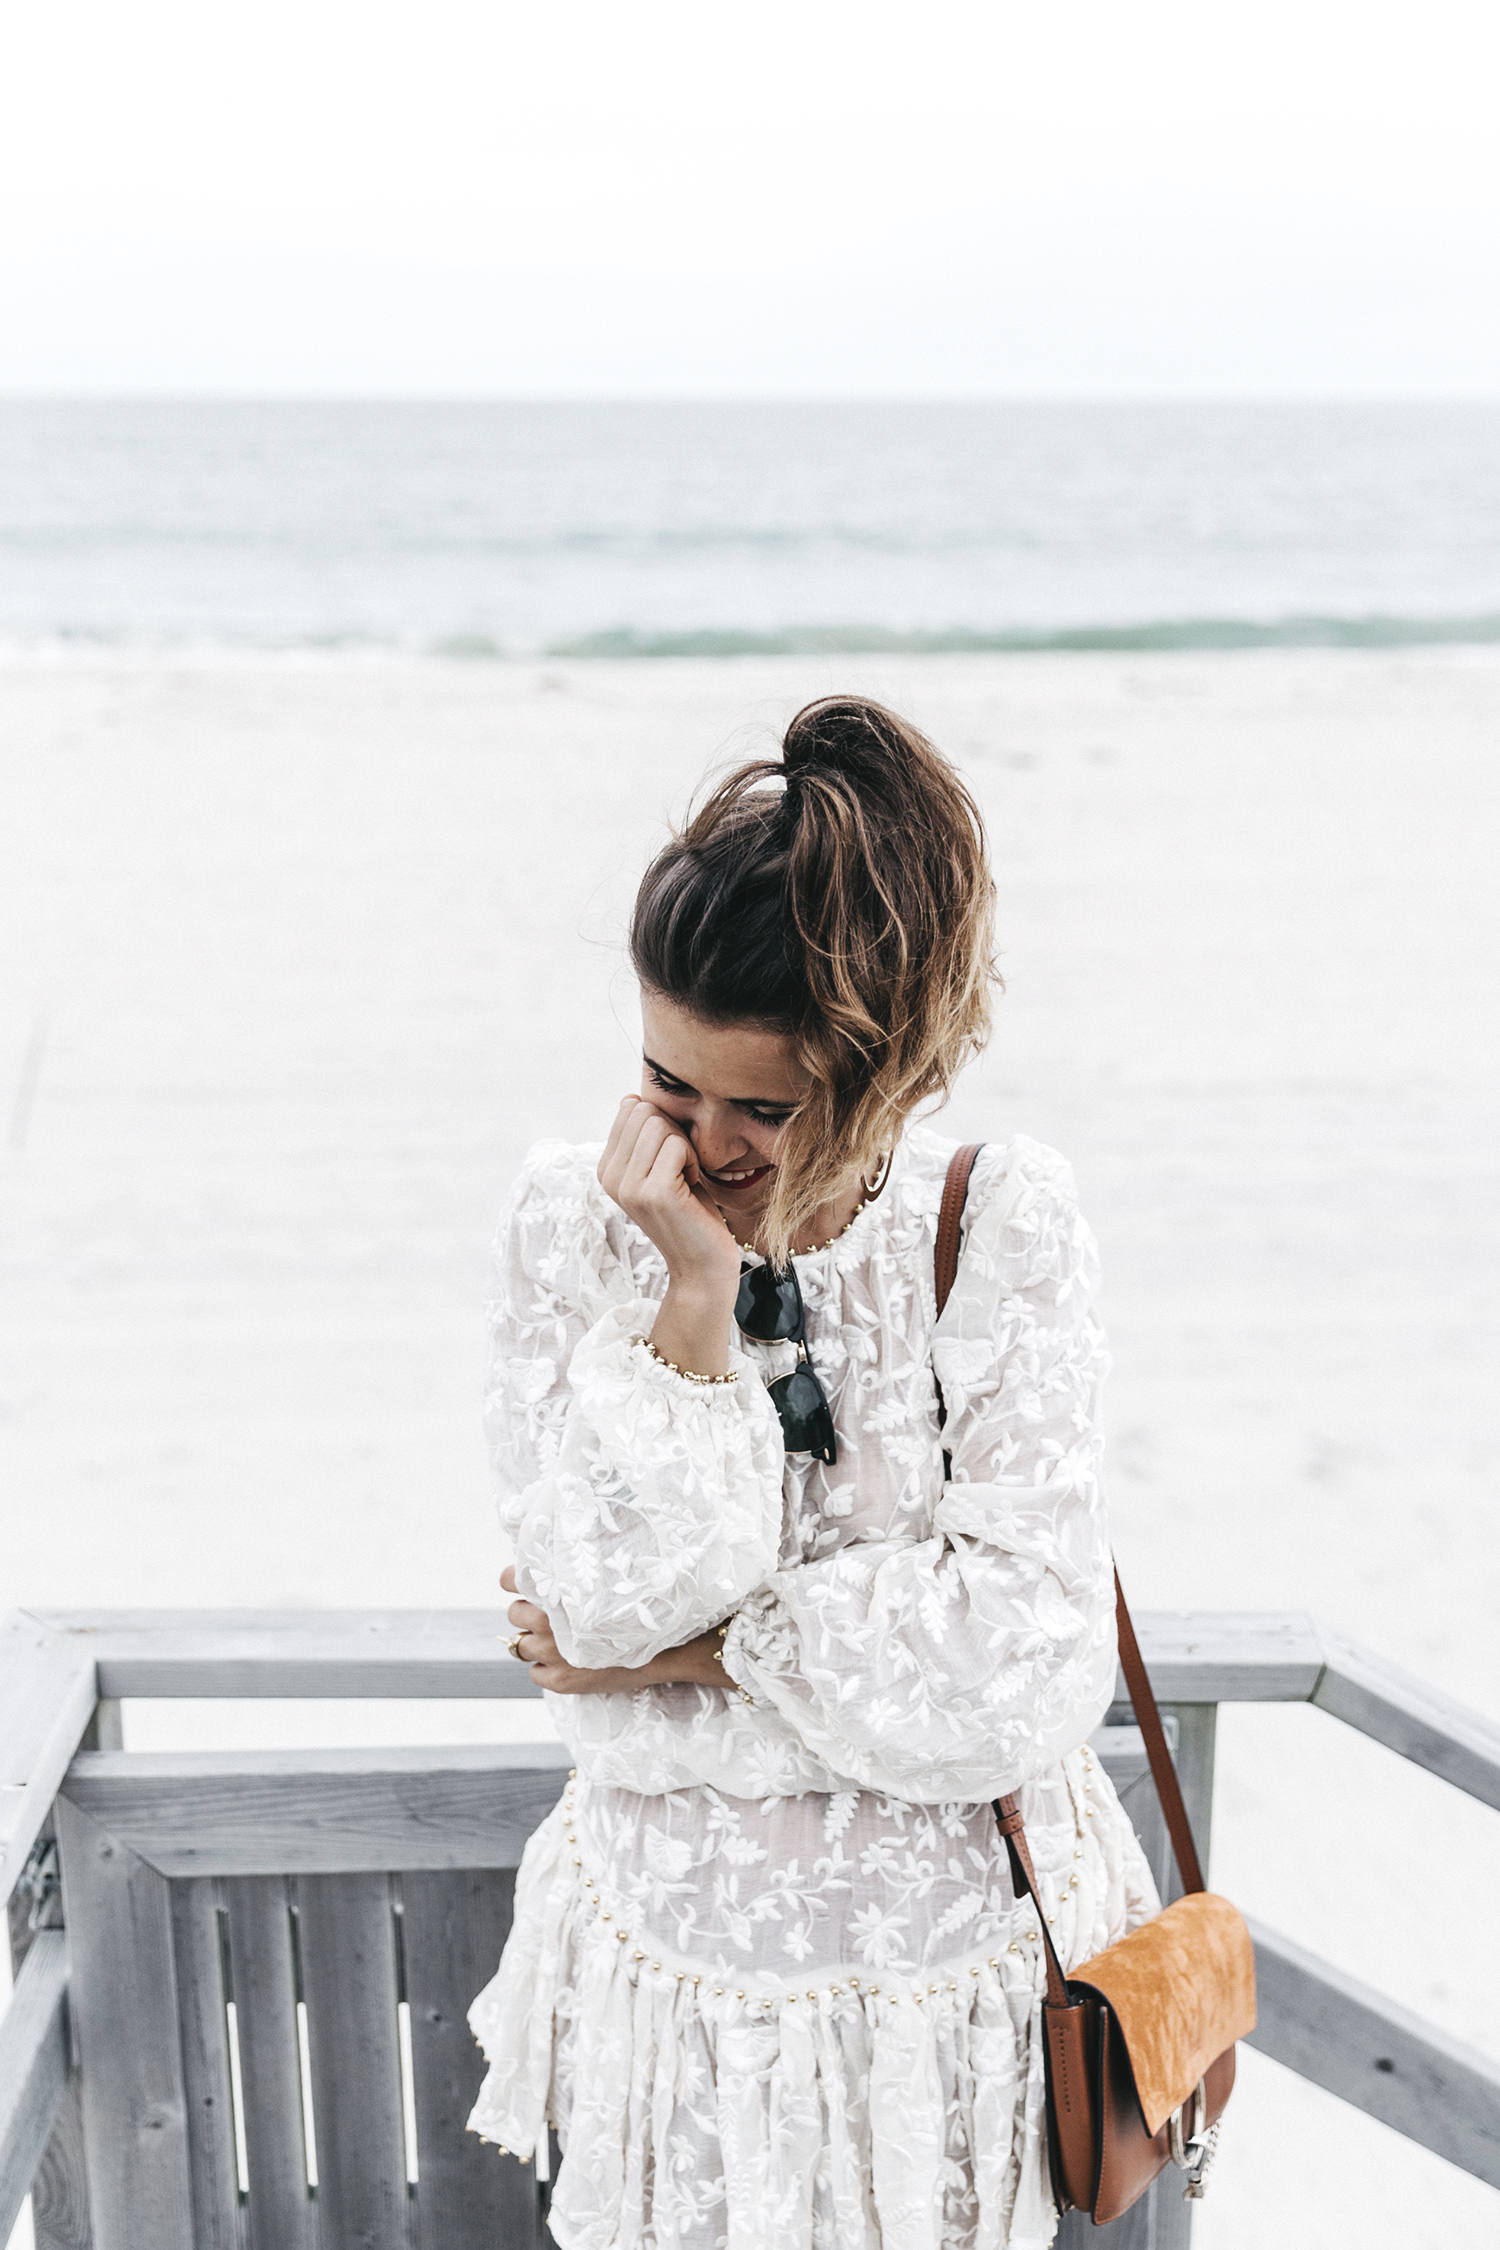 Revolve_in_The_Hamptons-Zimmermann-Embroidered_Dress-WHite_Dress-Chloe_Fay_Bag-Chloe_Wedges-Outfit-134